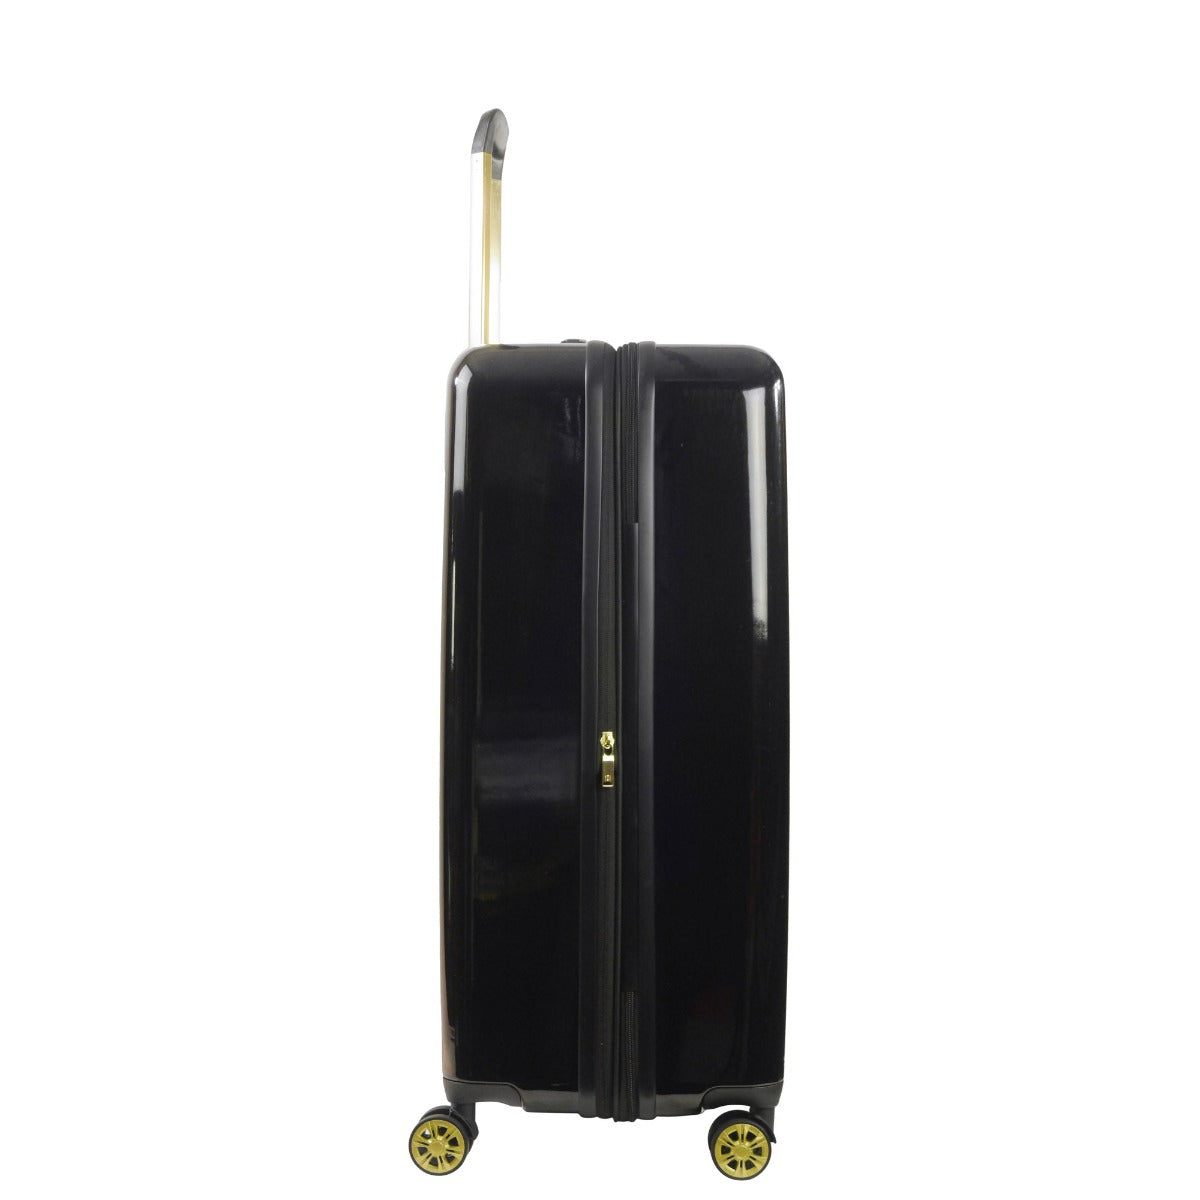 Ful Groove 31" hardside spinner suitcase checked black luggage gold details